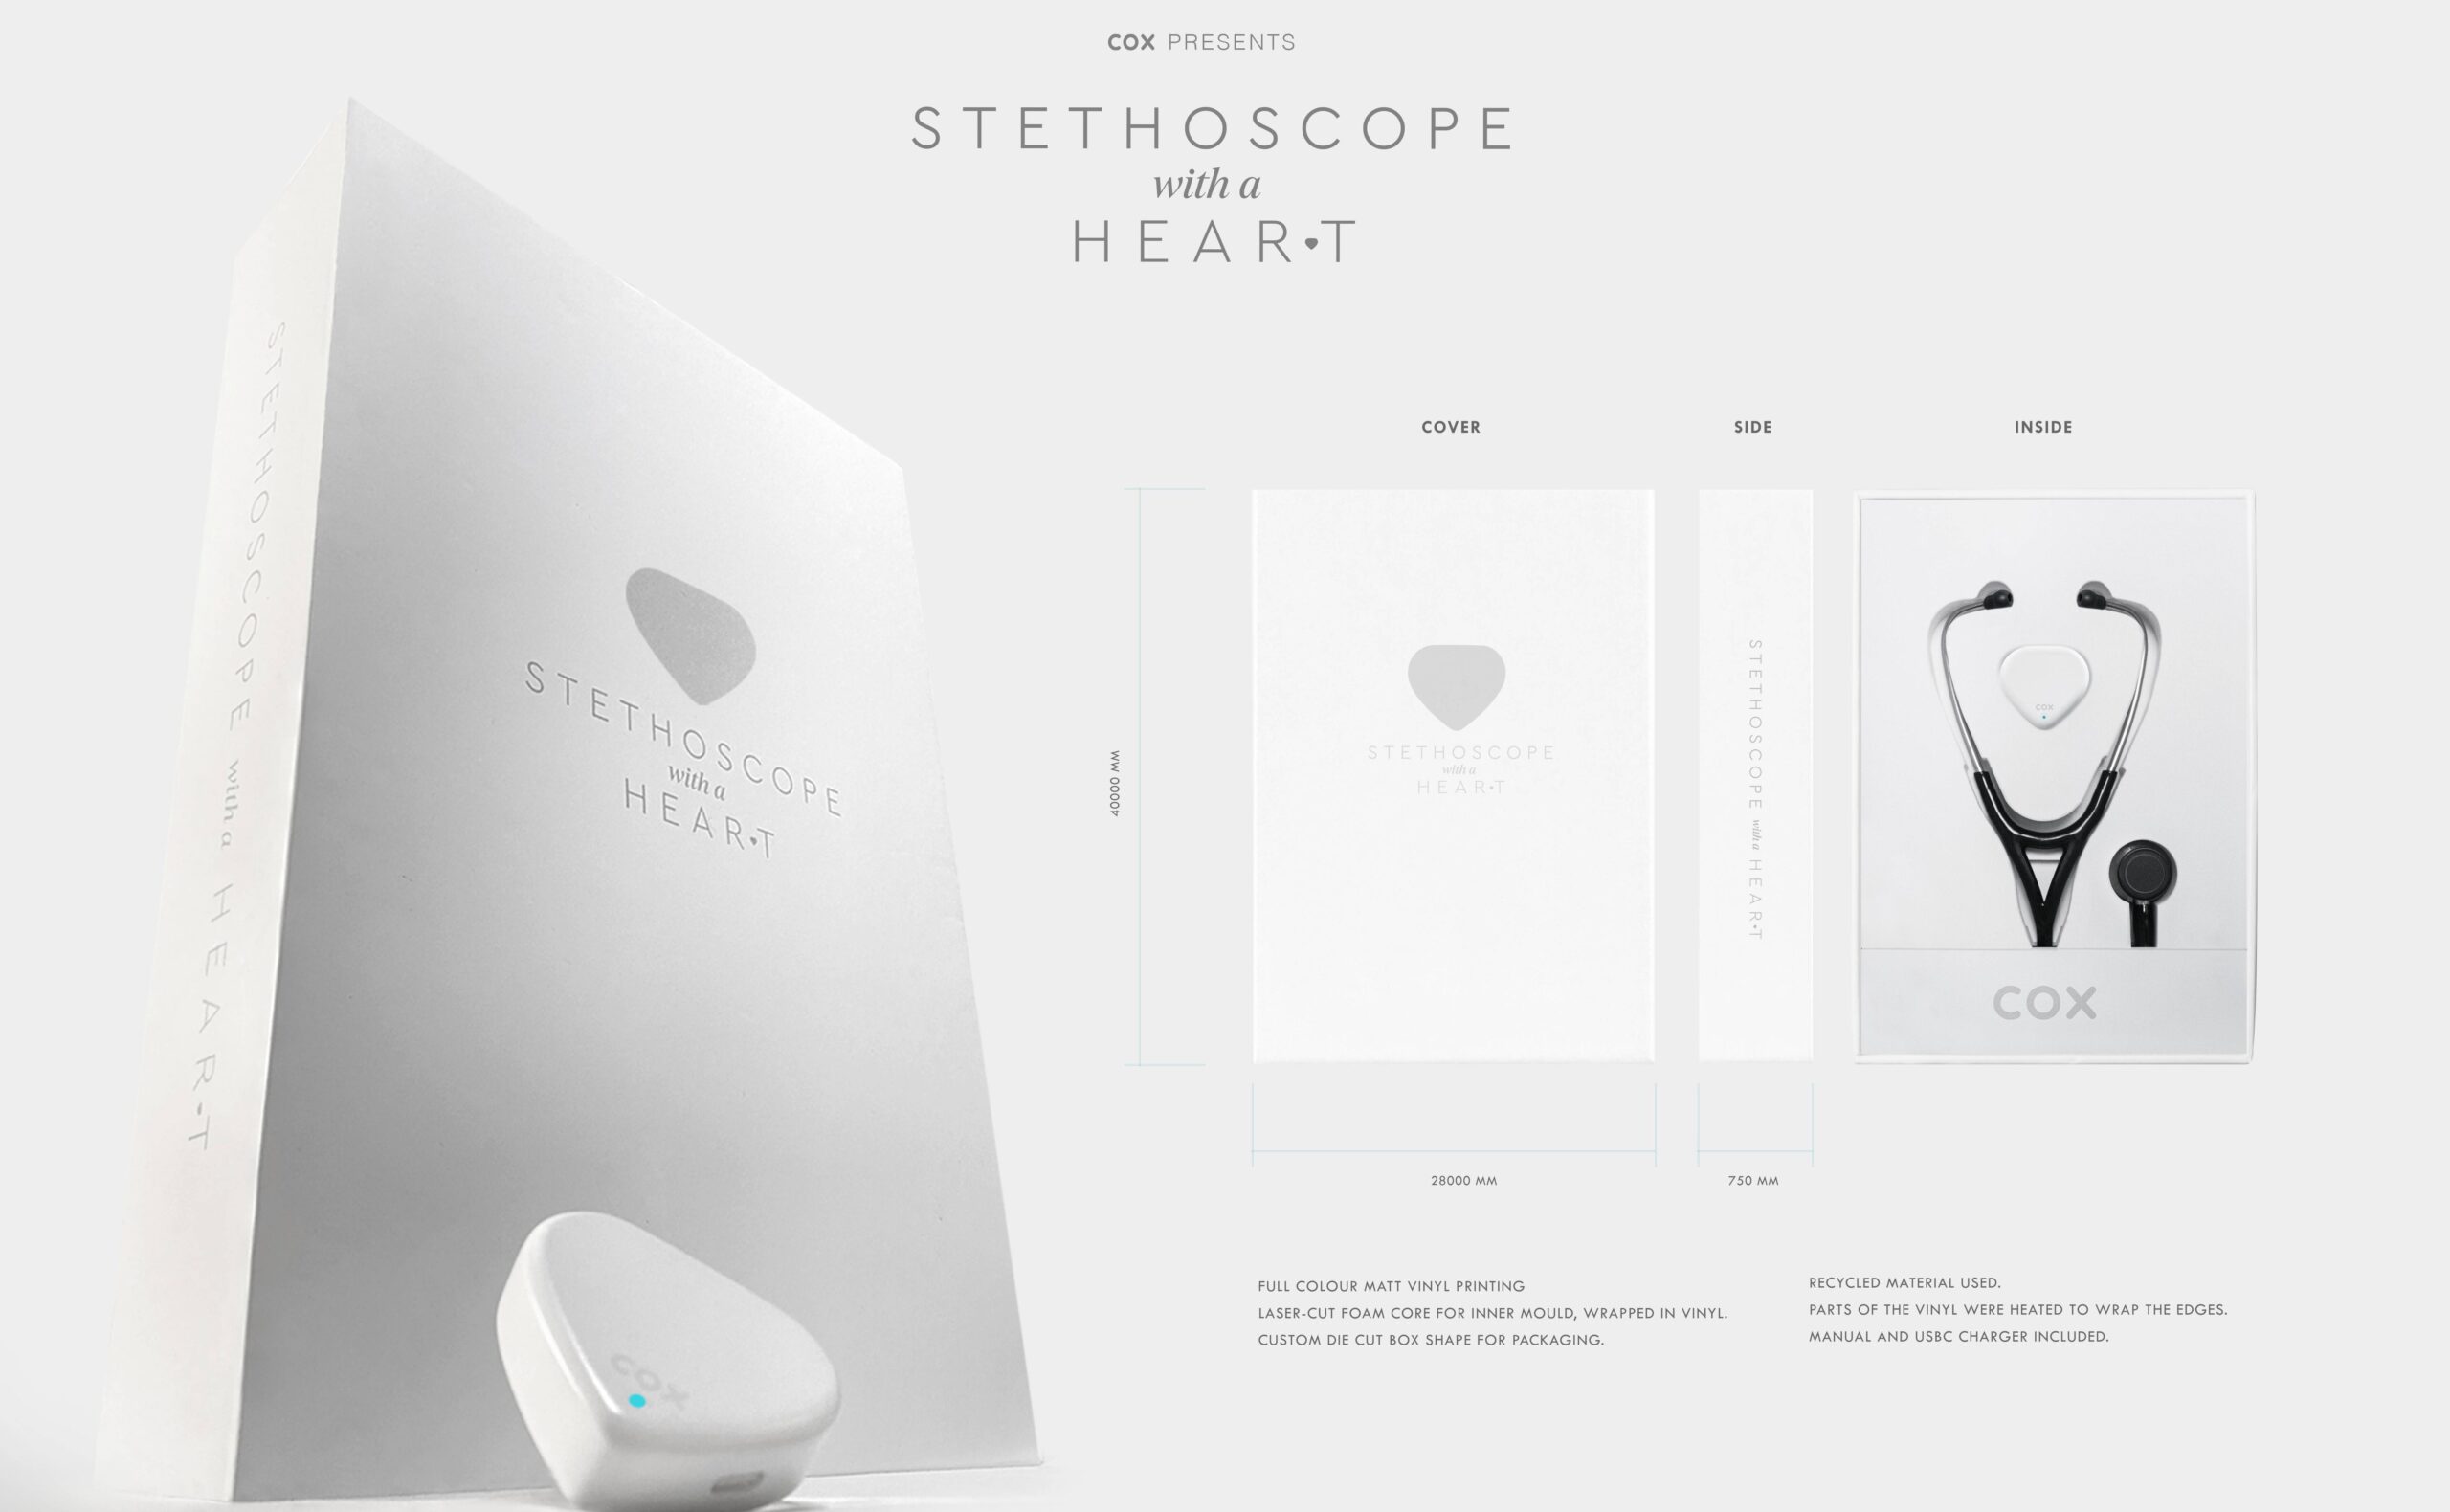 Packaging of the Stethoscope With a Heart product